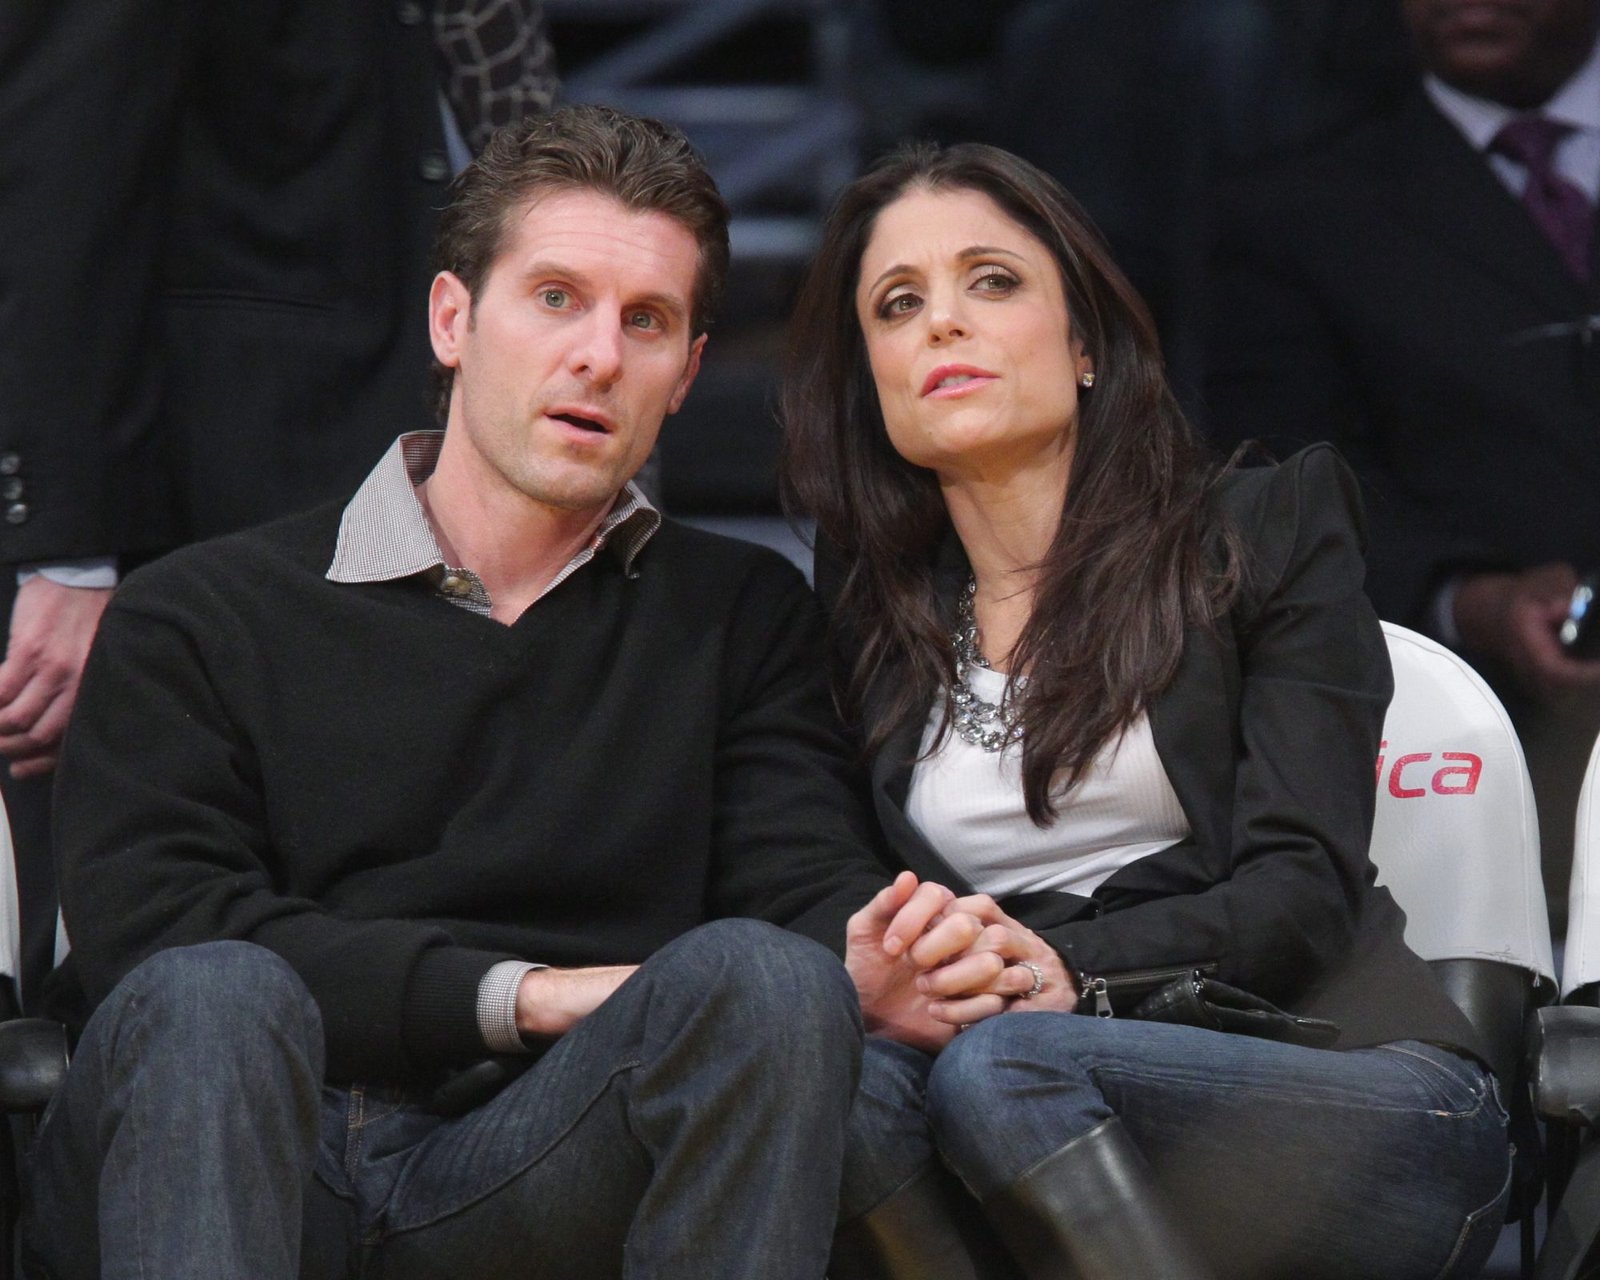 Frankel and Jason Hoppy tied the knot in March 2010, but she filed for divorce just two years later.